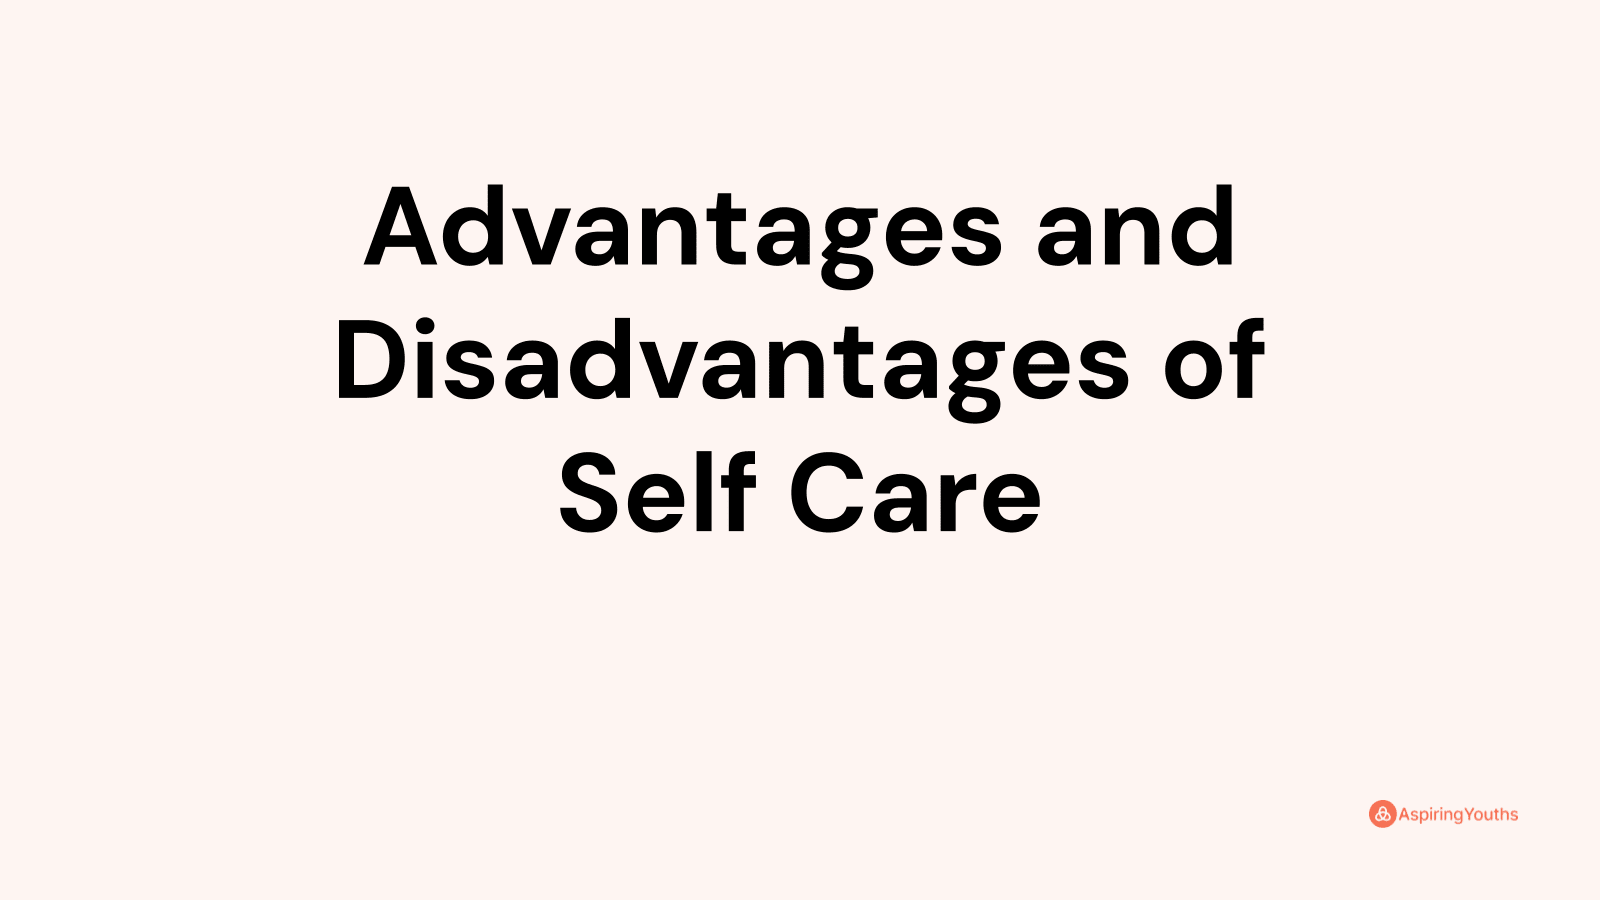 Advantages and disadvantages of Self Care